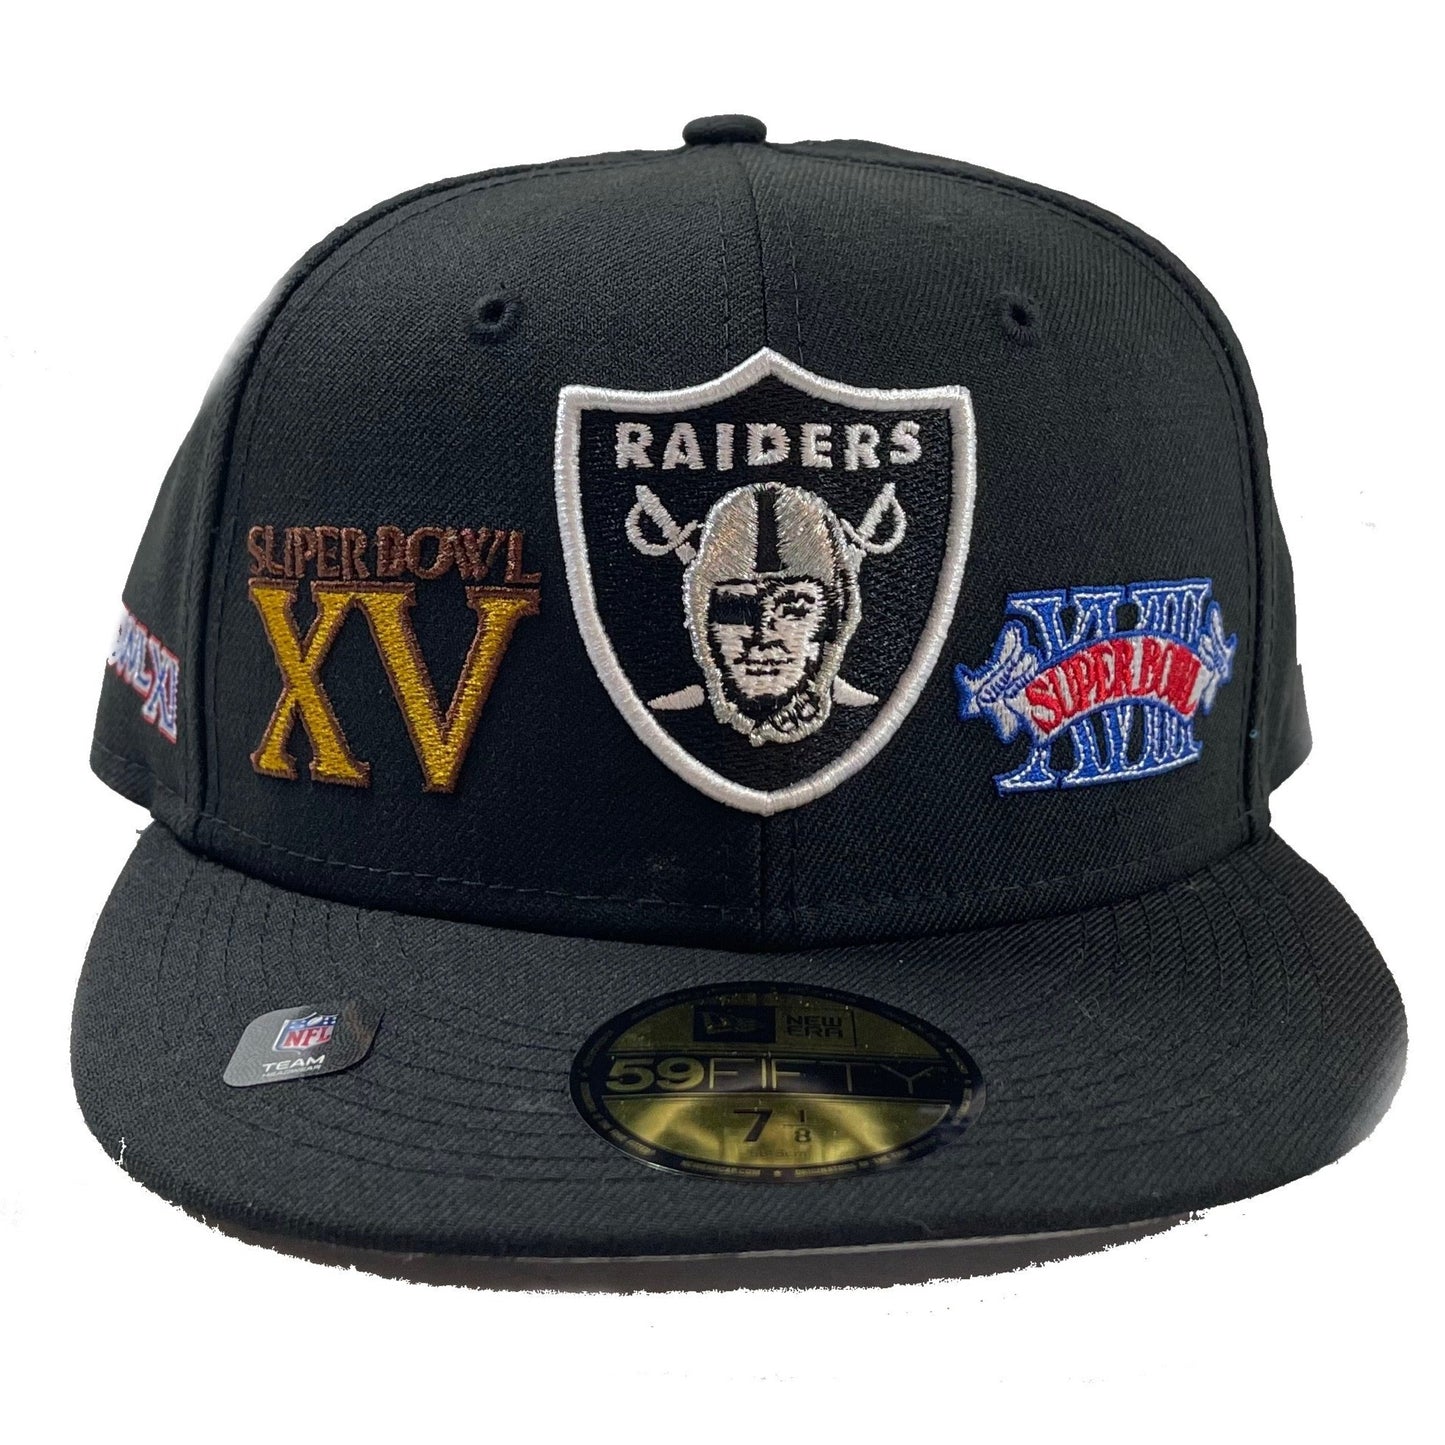 Raiders Patches (Black) Fitted